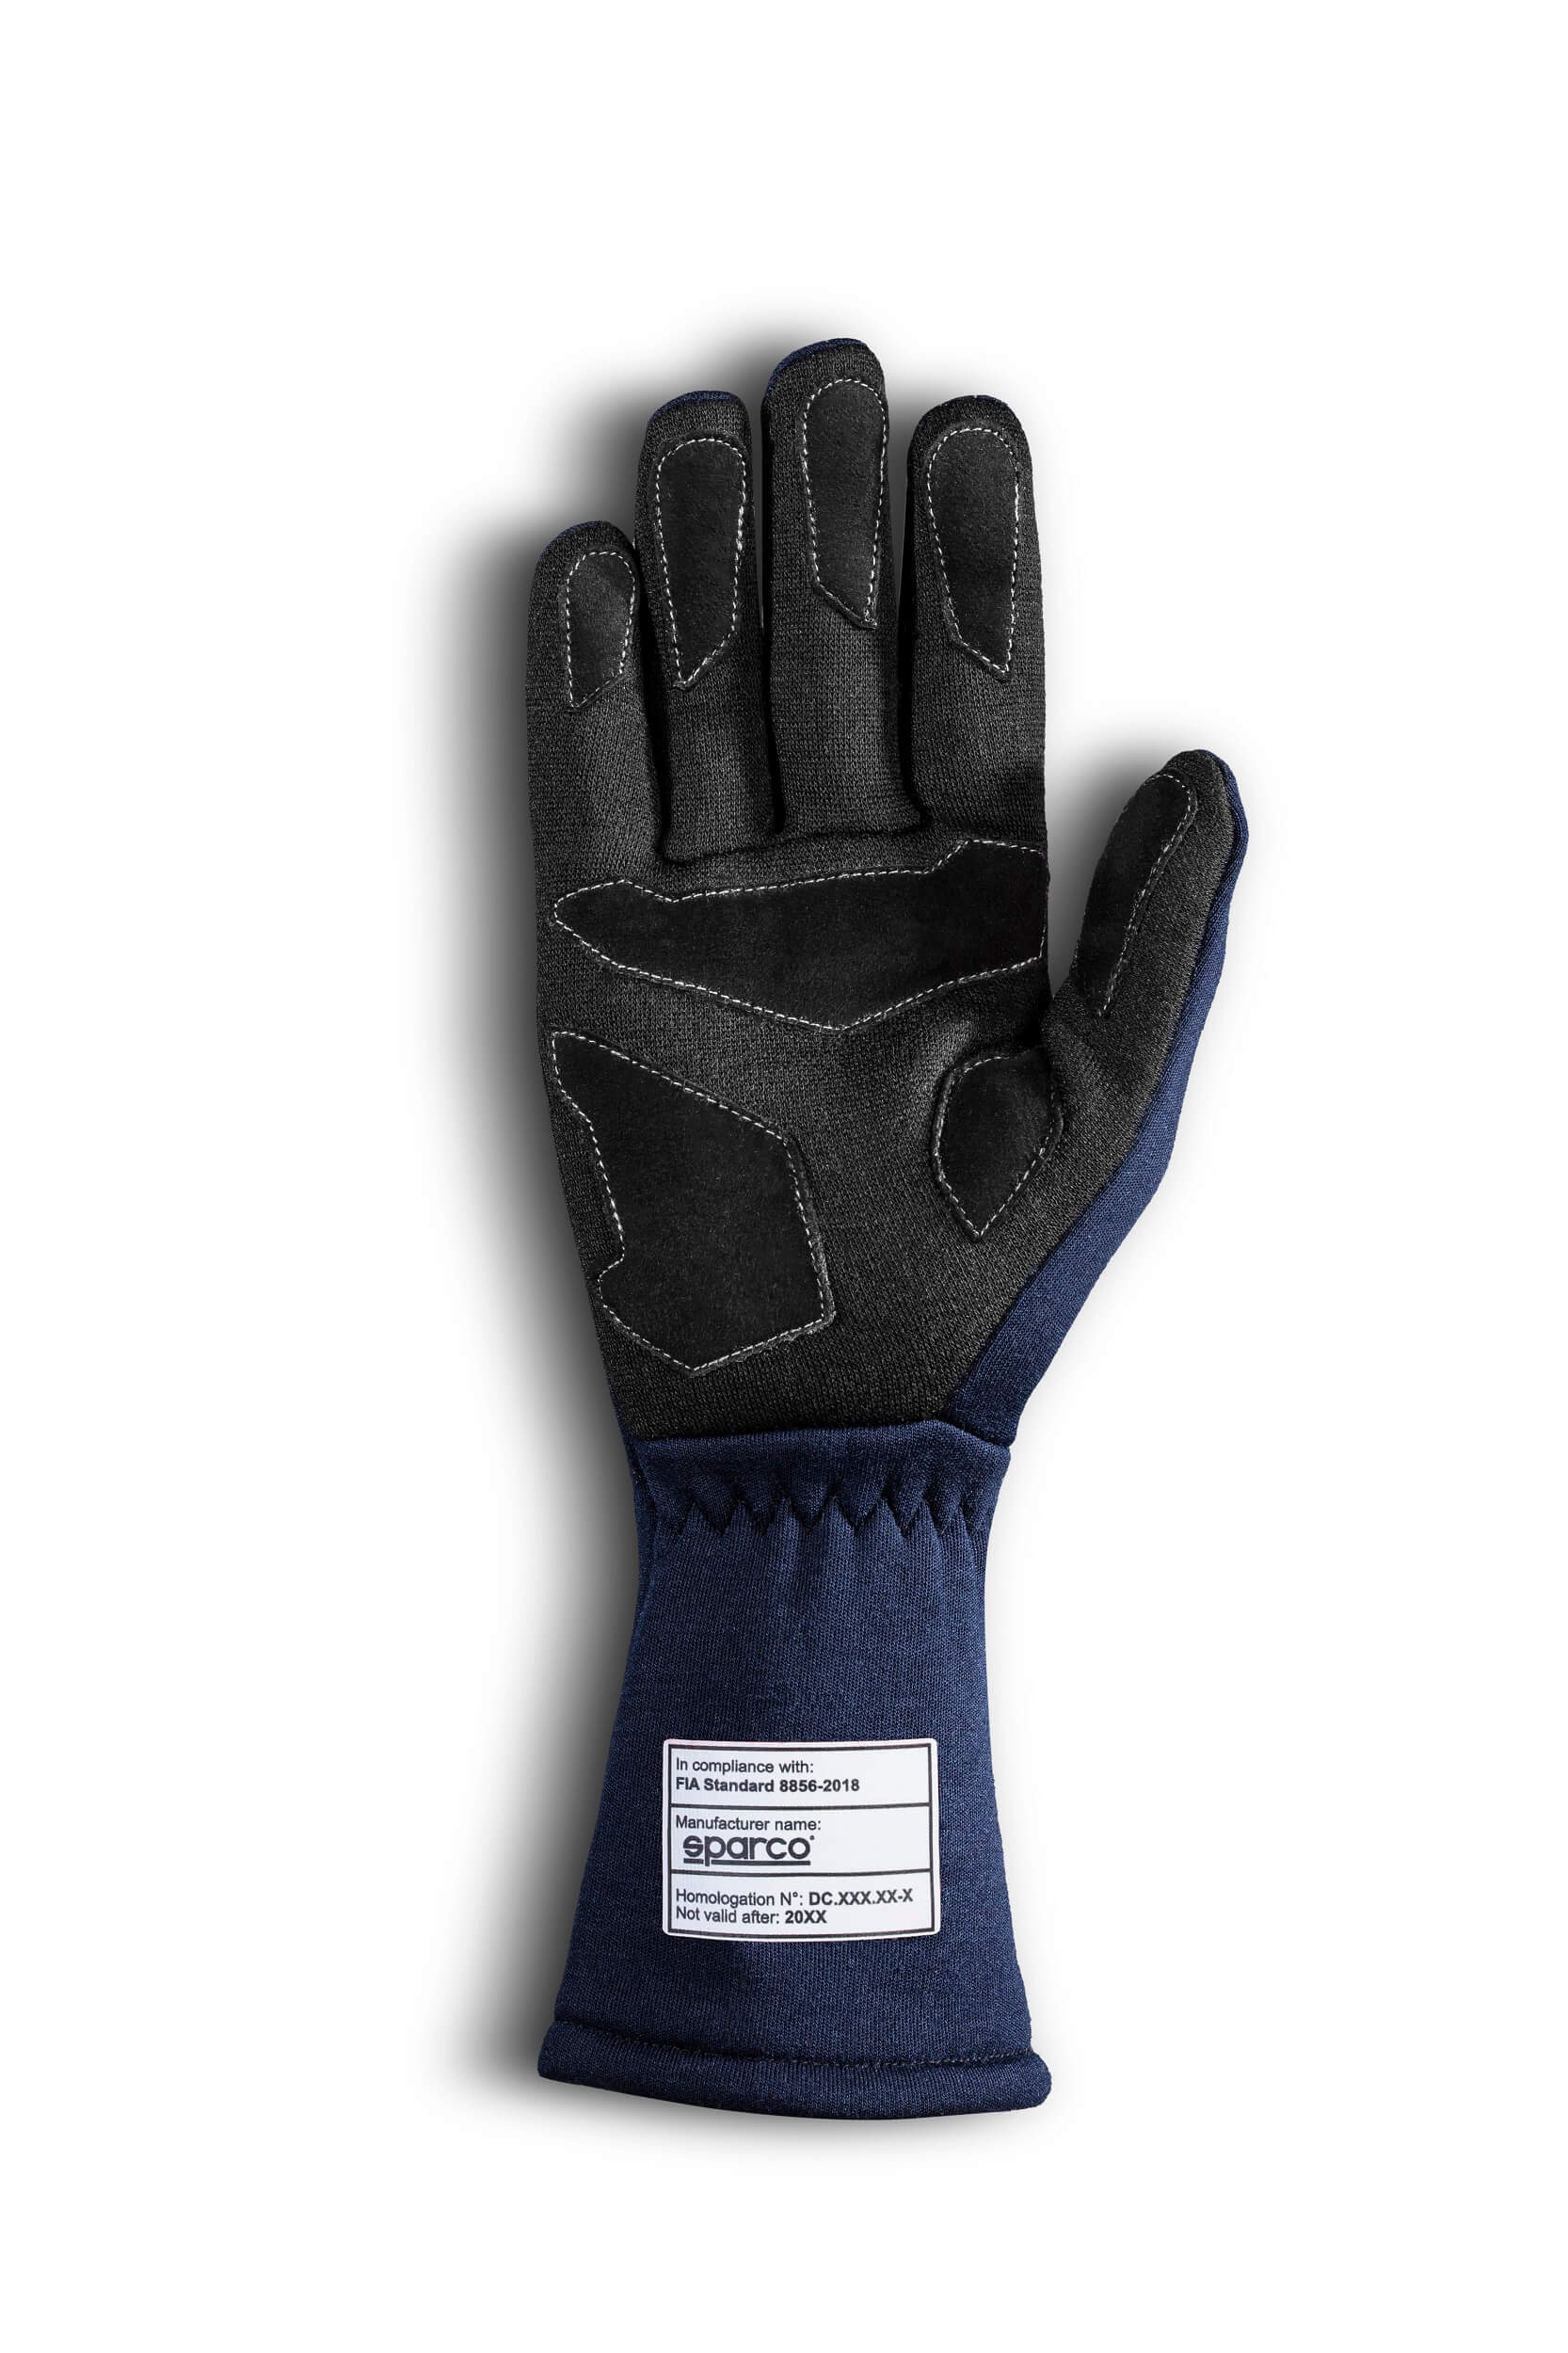 SPARCO 00136413BM LAND CLASSIC Racing gloves, FIA 8856-2018, navy blue, size 13 Photo-1 